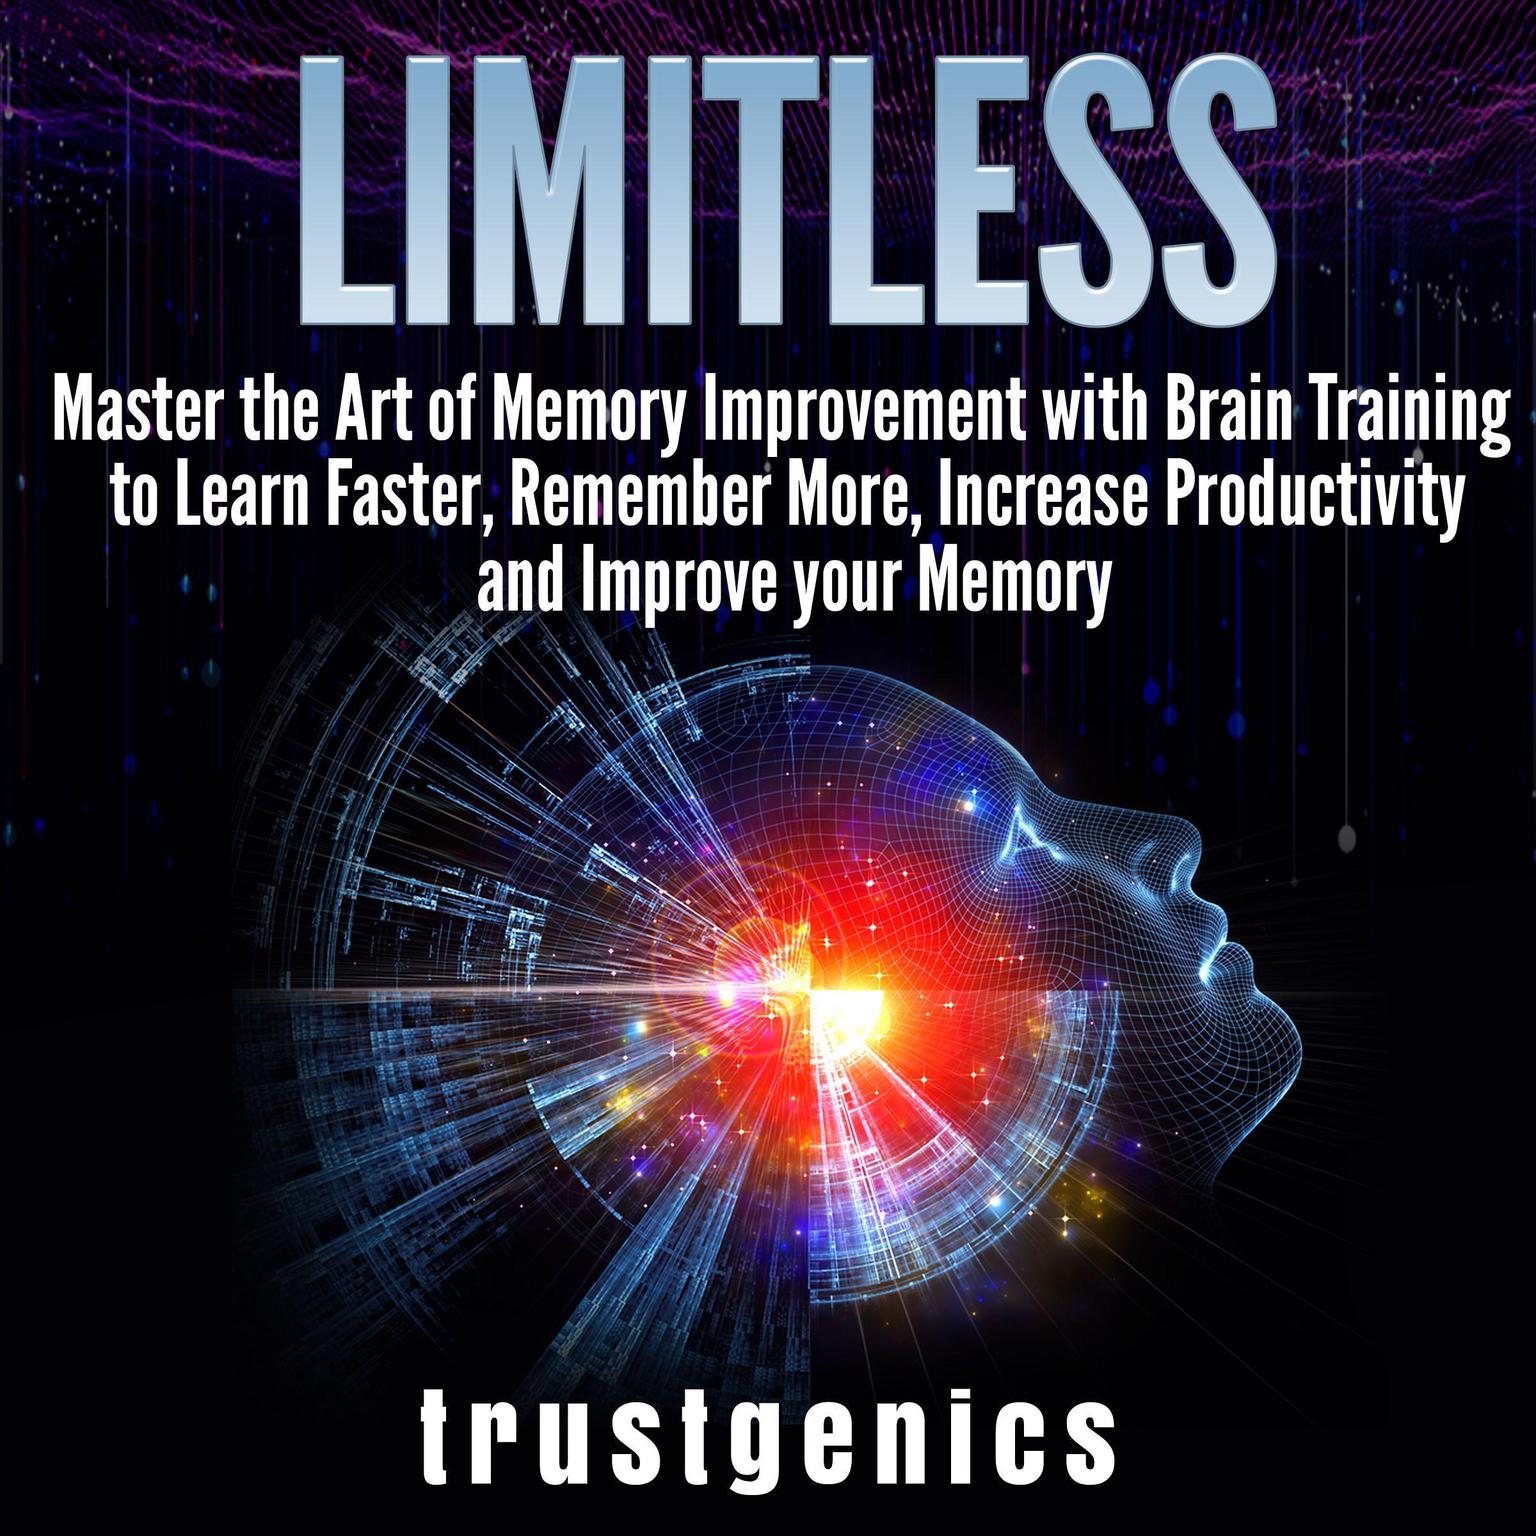 Limitless: : Master the Art of Memory Improvement with Brain Training to Learn Faster, Remember More, Increase Productivity and Improve Memory Audiobook, by Trust Genics